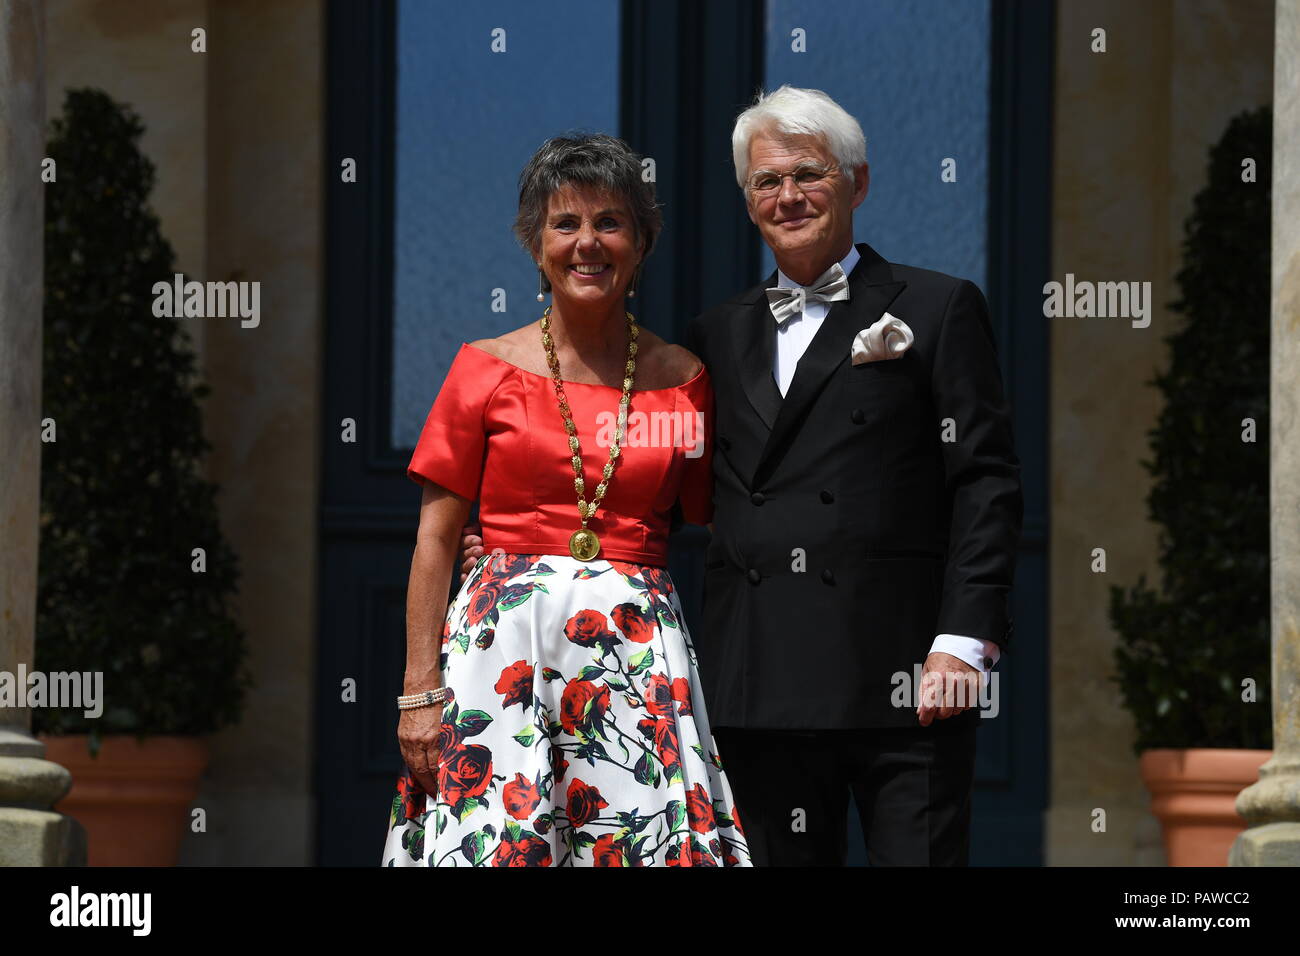 Germany, Bayreuth. 25th July, 2018. Brigitte Merk-Erbe, mayor of Bayreuth and her husband Thomas arrive for the premiere at the Festspielhaus. The Richard Wagner Festival 2018 will commence with a new rendition of 'Lohengrin'. Lovers of classical music from all over the world will head to Bayreuth between the 25th of July and the 29th of August in order to enjoy five long weeks of Wagner's opera pieces. Credit: Matthias Balk/dpa/Alamy Live News Stock Photo